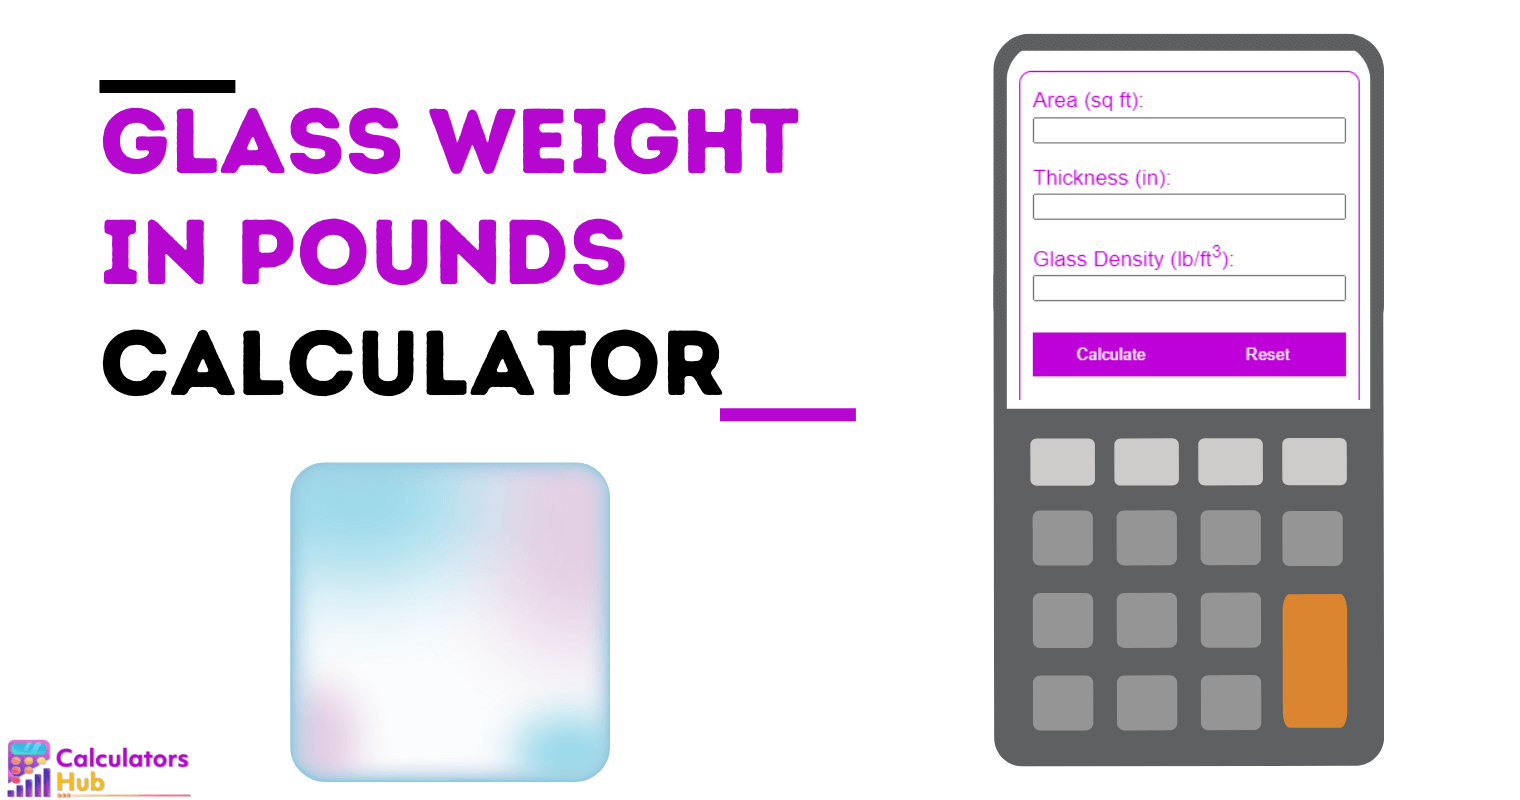 Glass Weight Calculator in Pounds